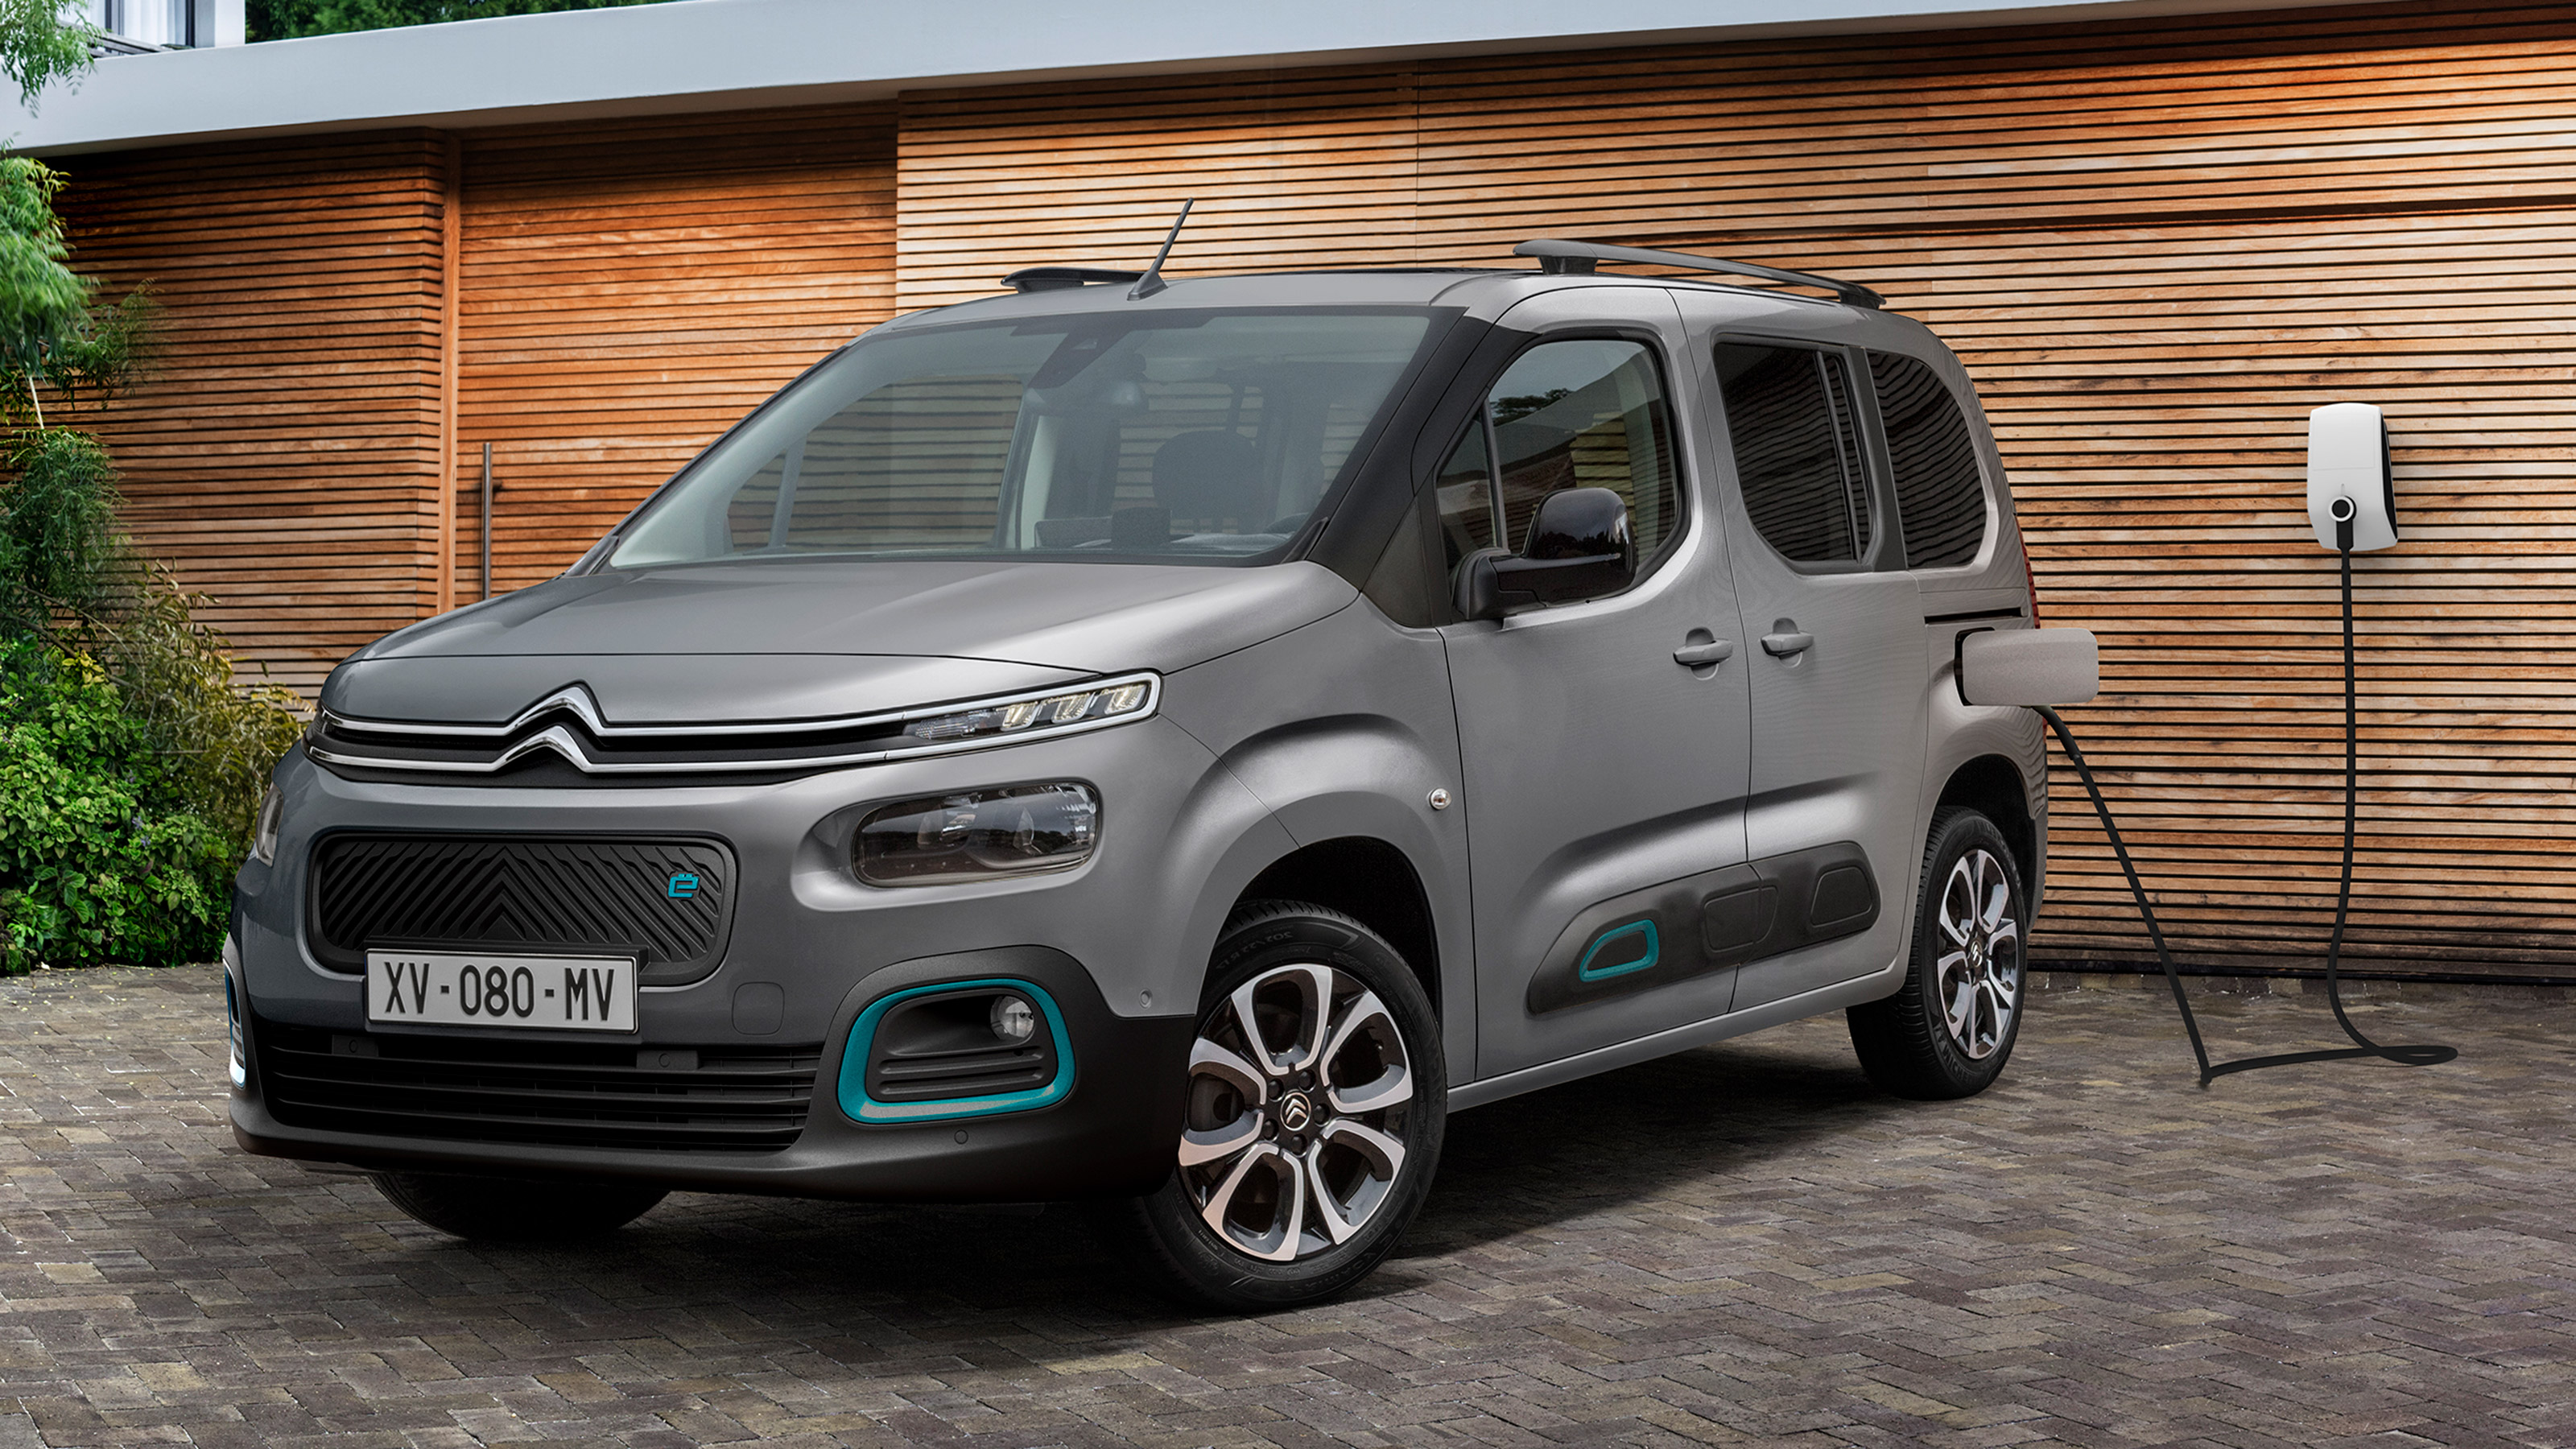 New pureelectric Citroen eBerlingo launched with 170